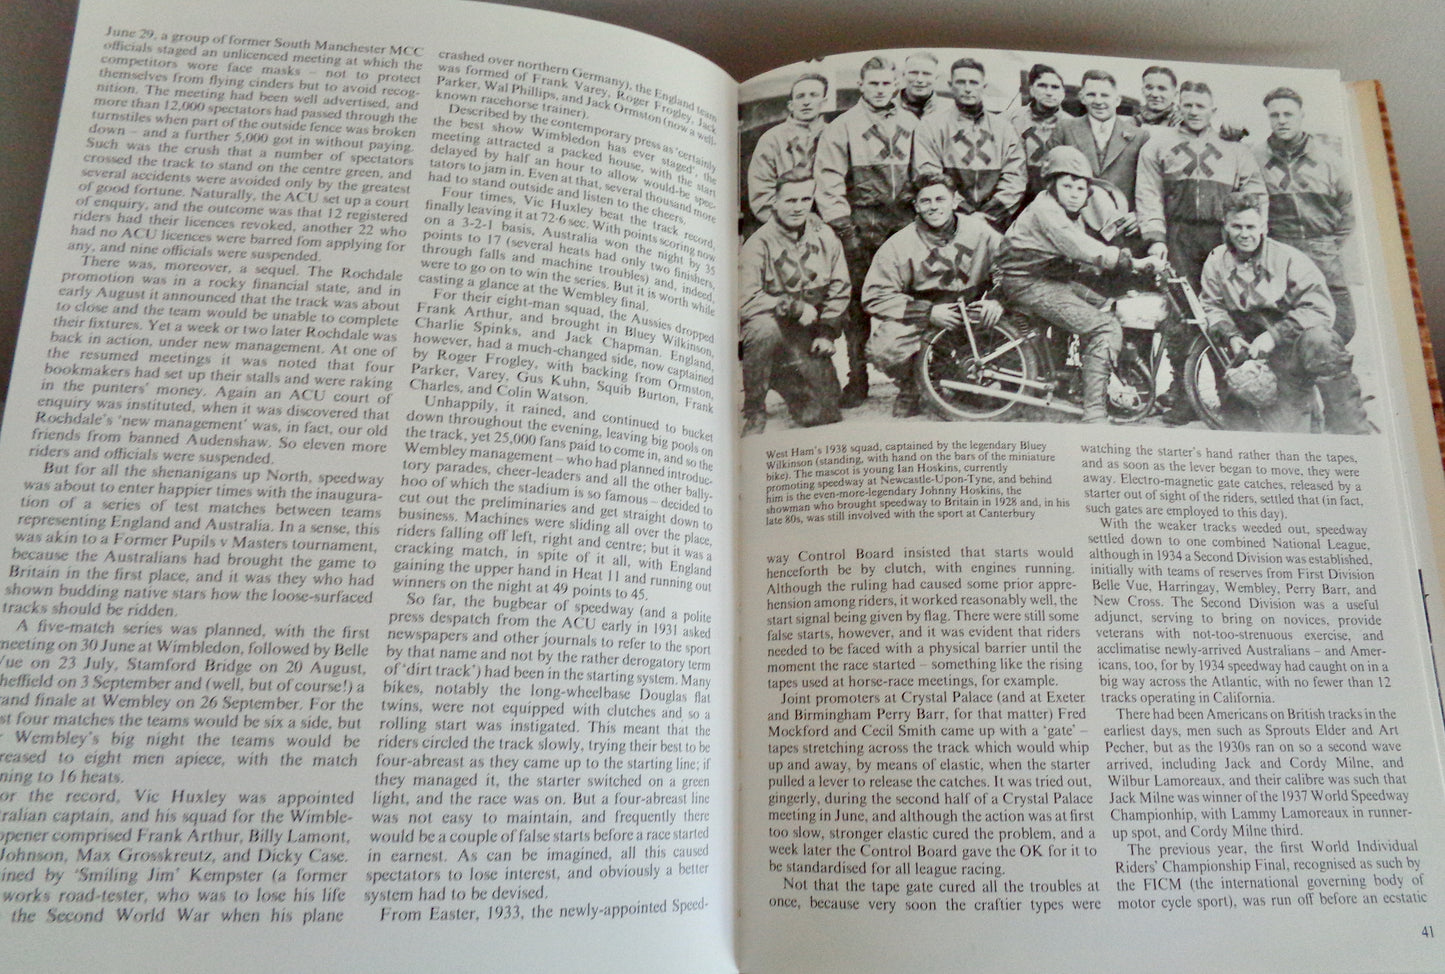 RESERVED FOR MARTIN K: 1981 Book Motor Cycling in the 1930s by Bob Currie